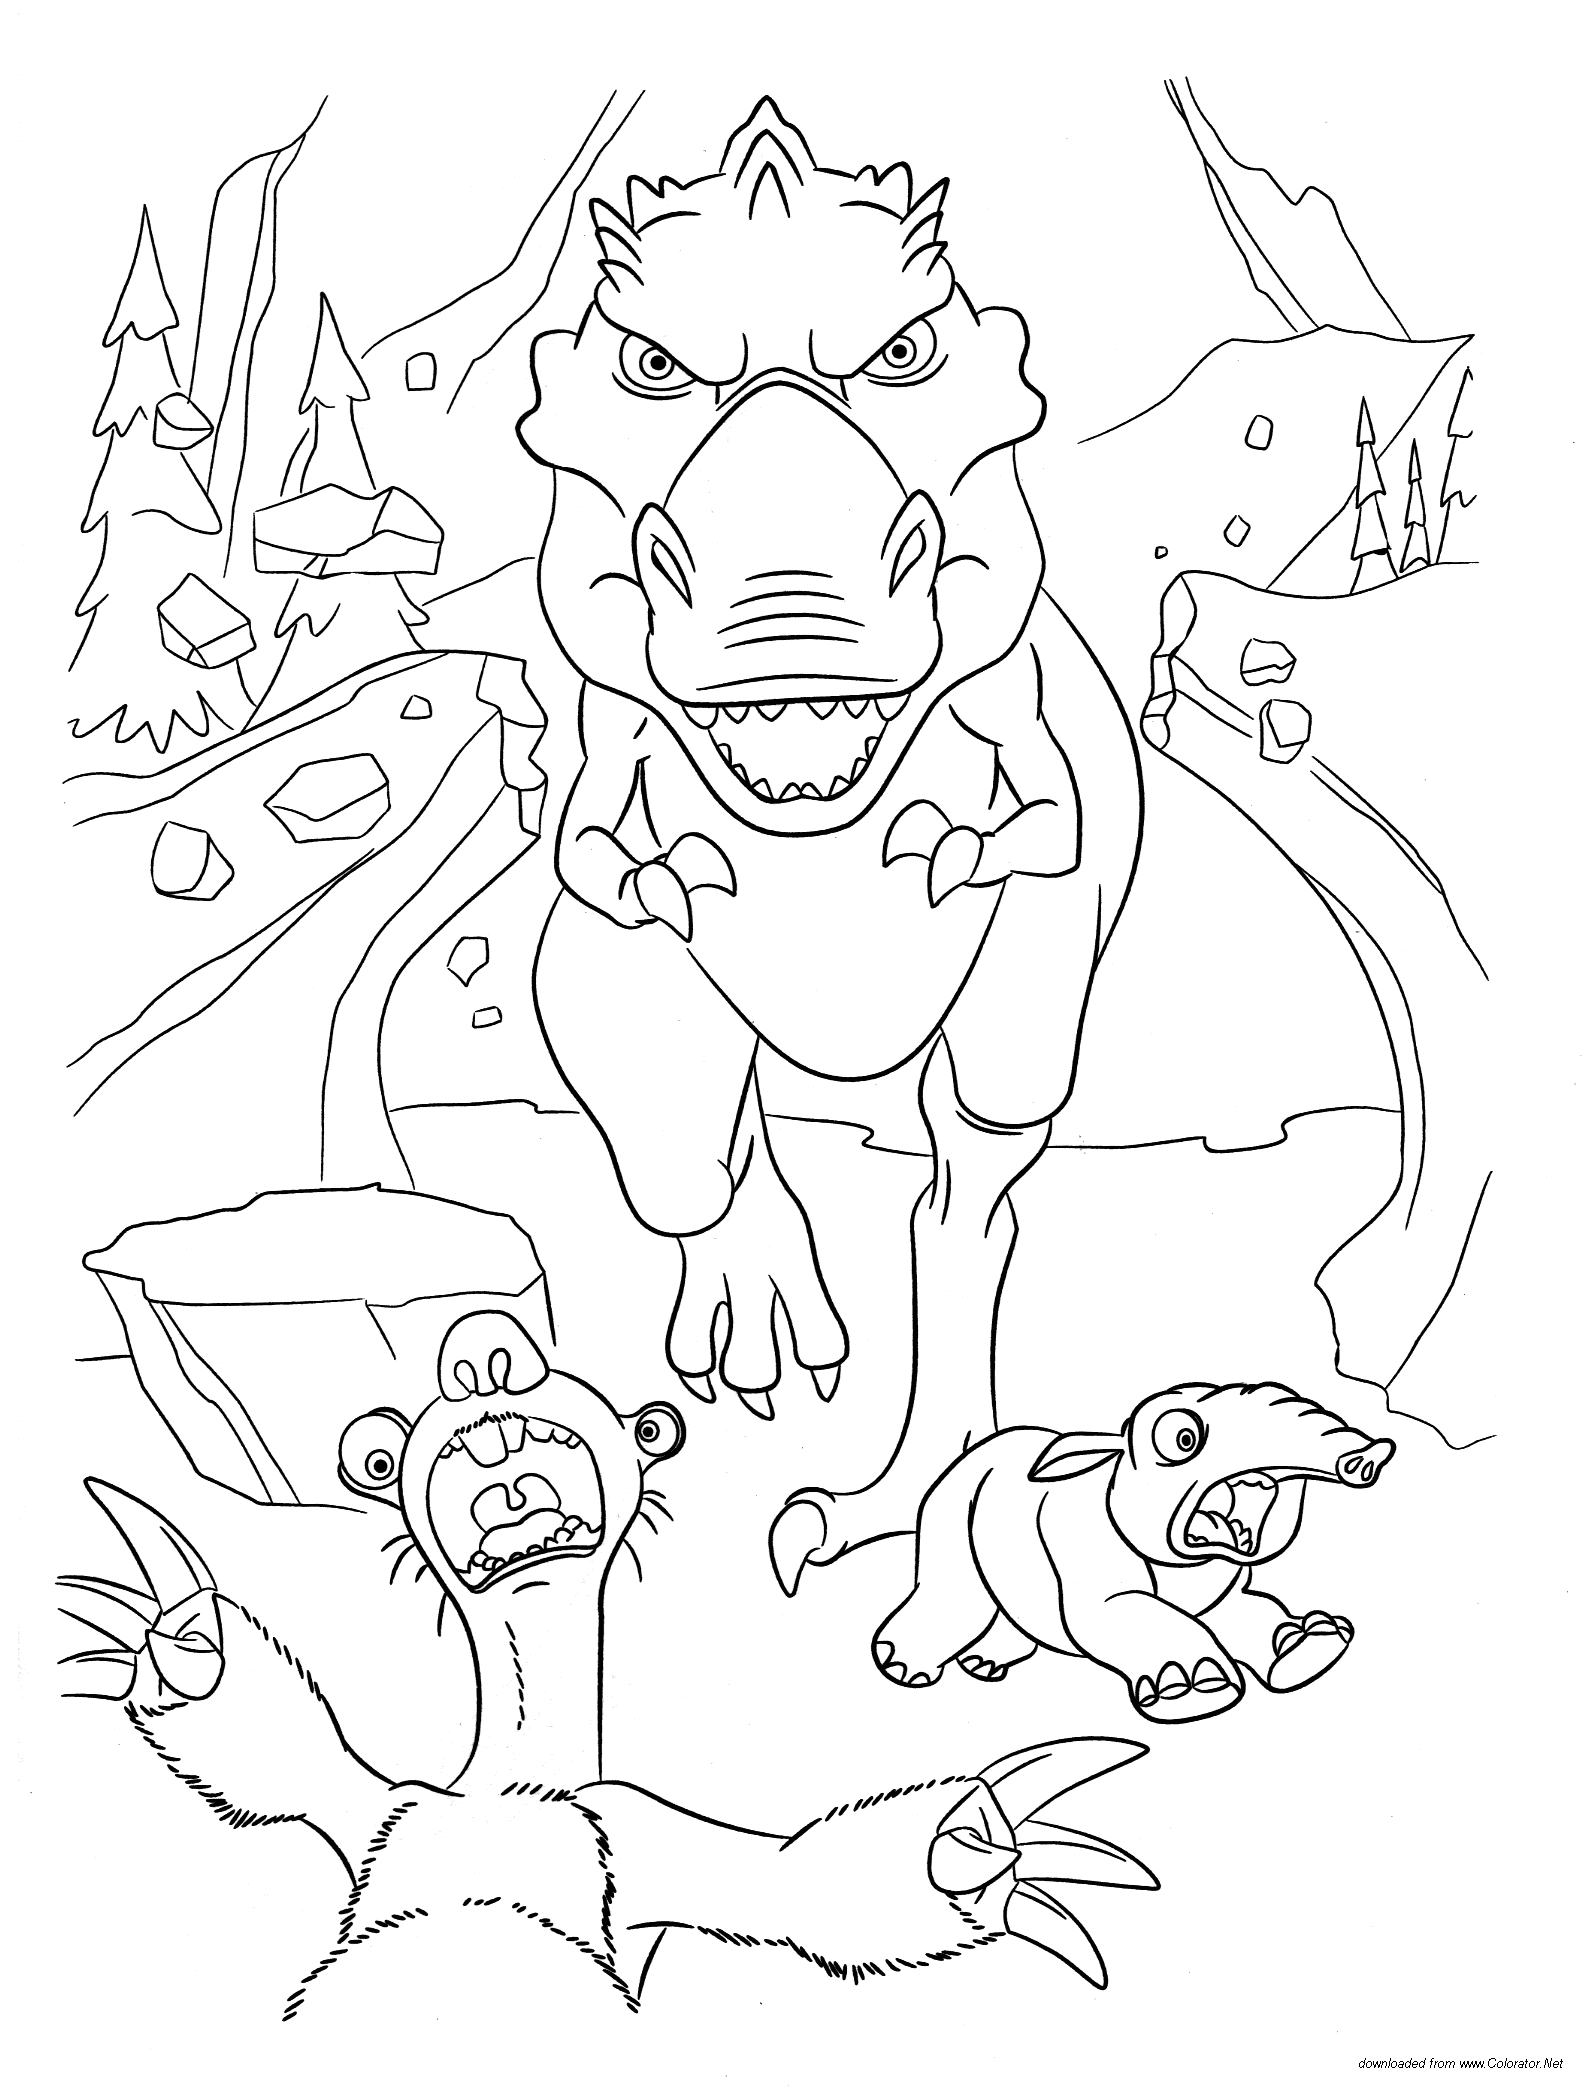 Coloring Pages Ice Age 3 - Coloring Home